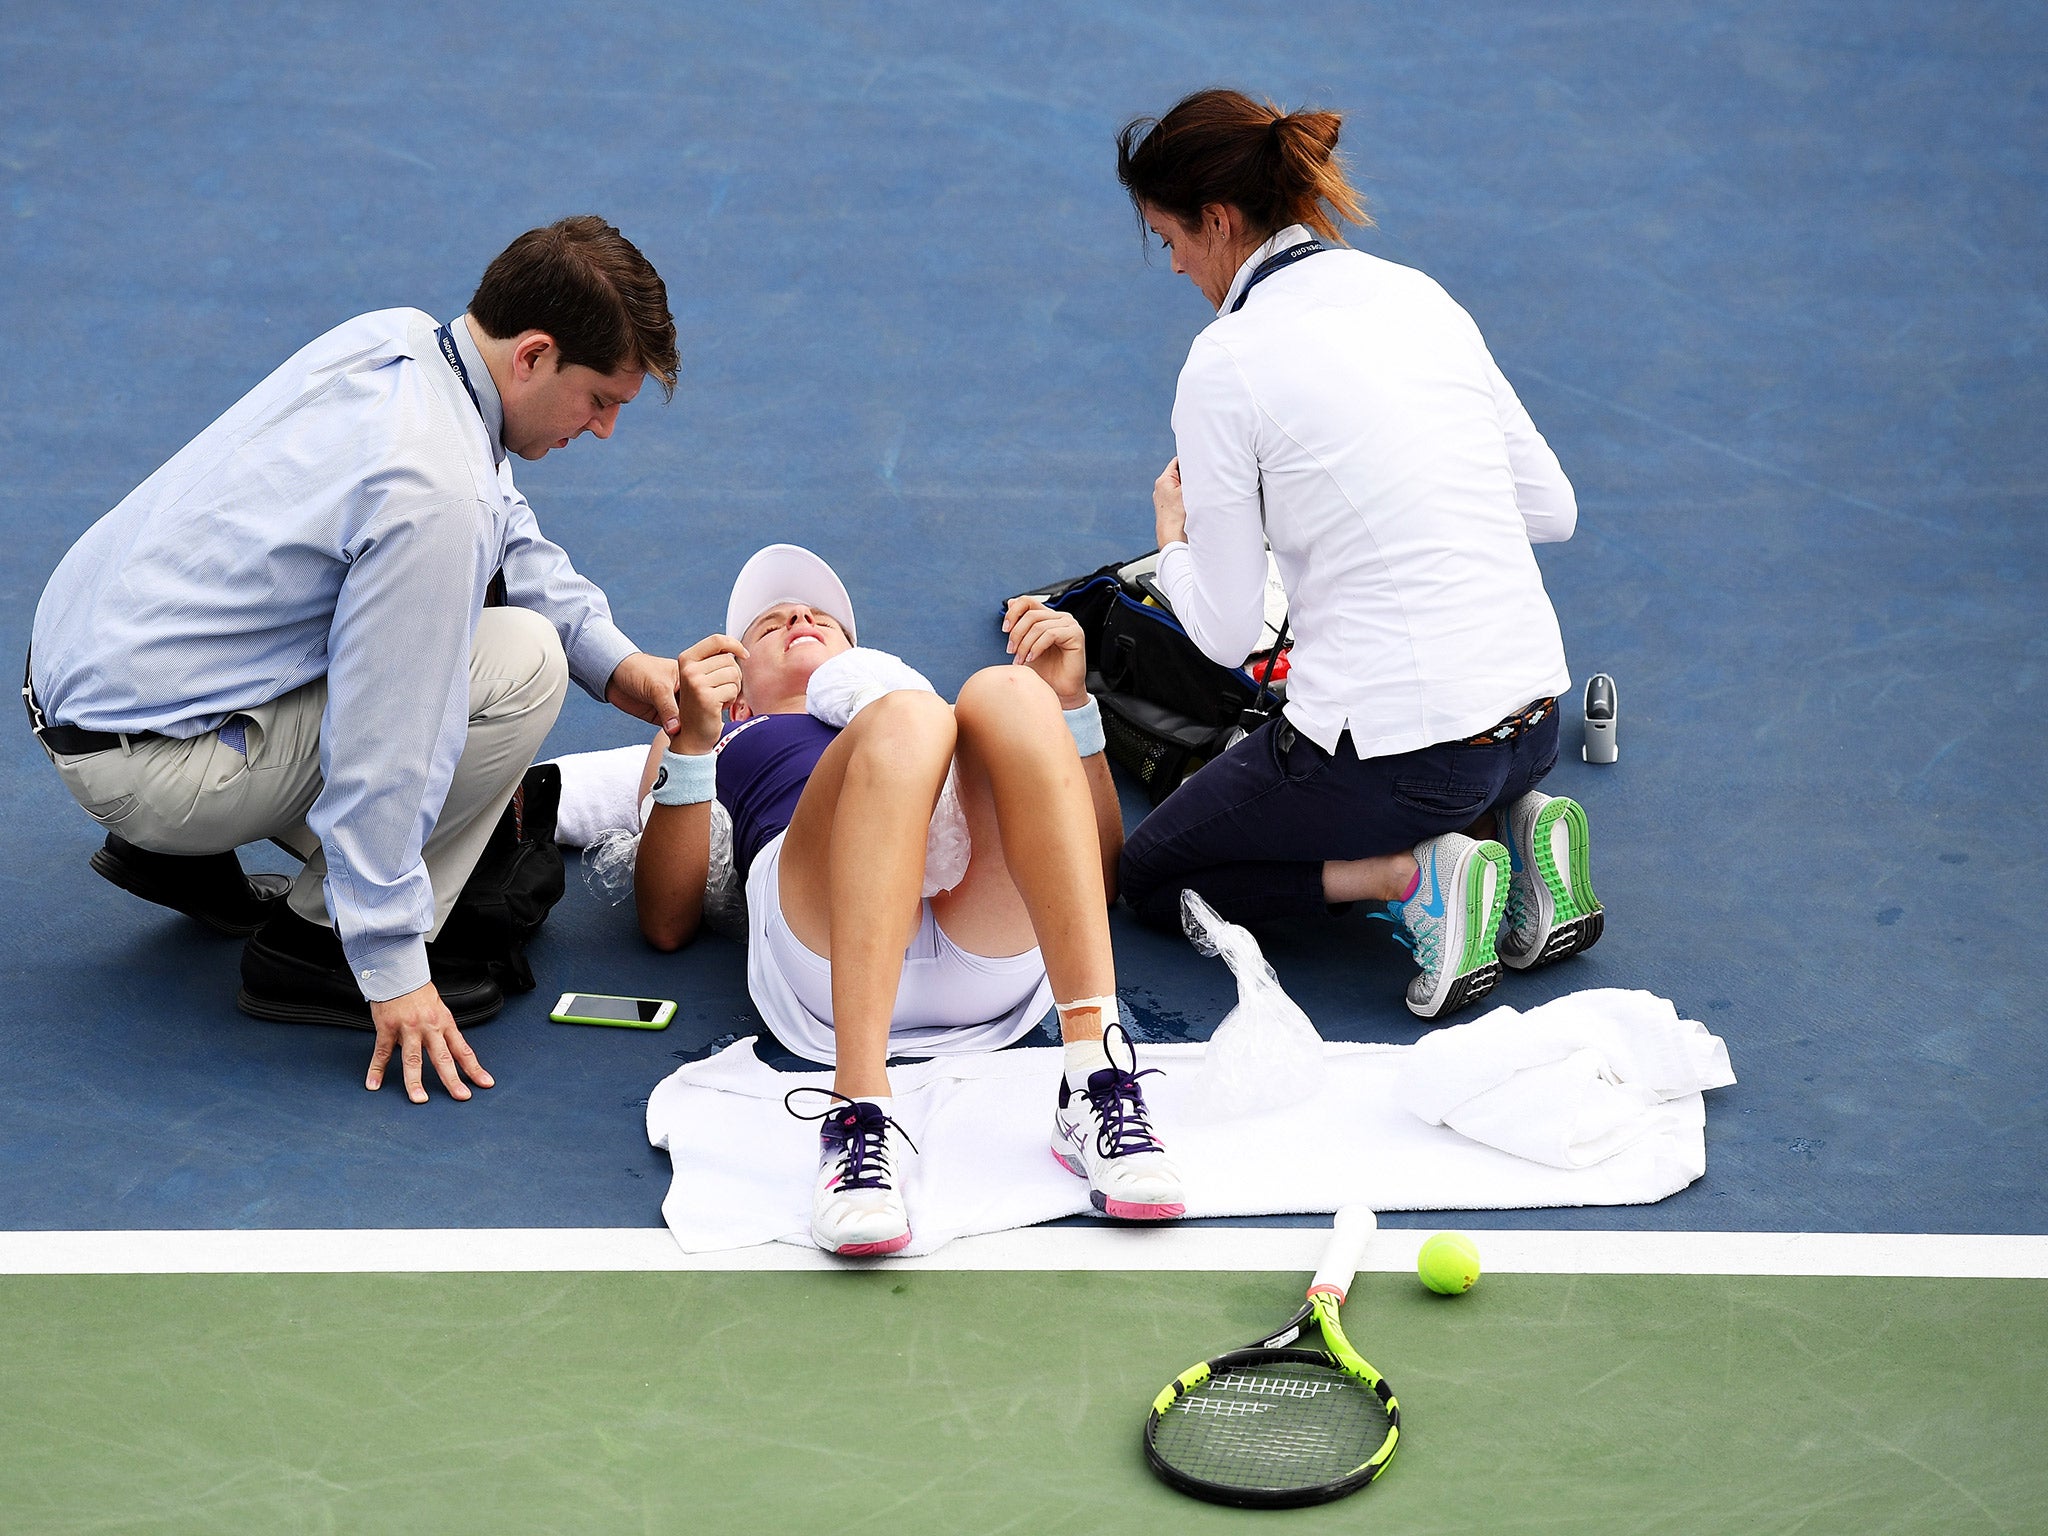 Johanna Konta receives treatment after collapsing during her US Open second round match